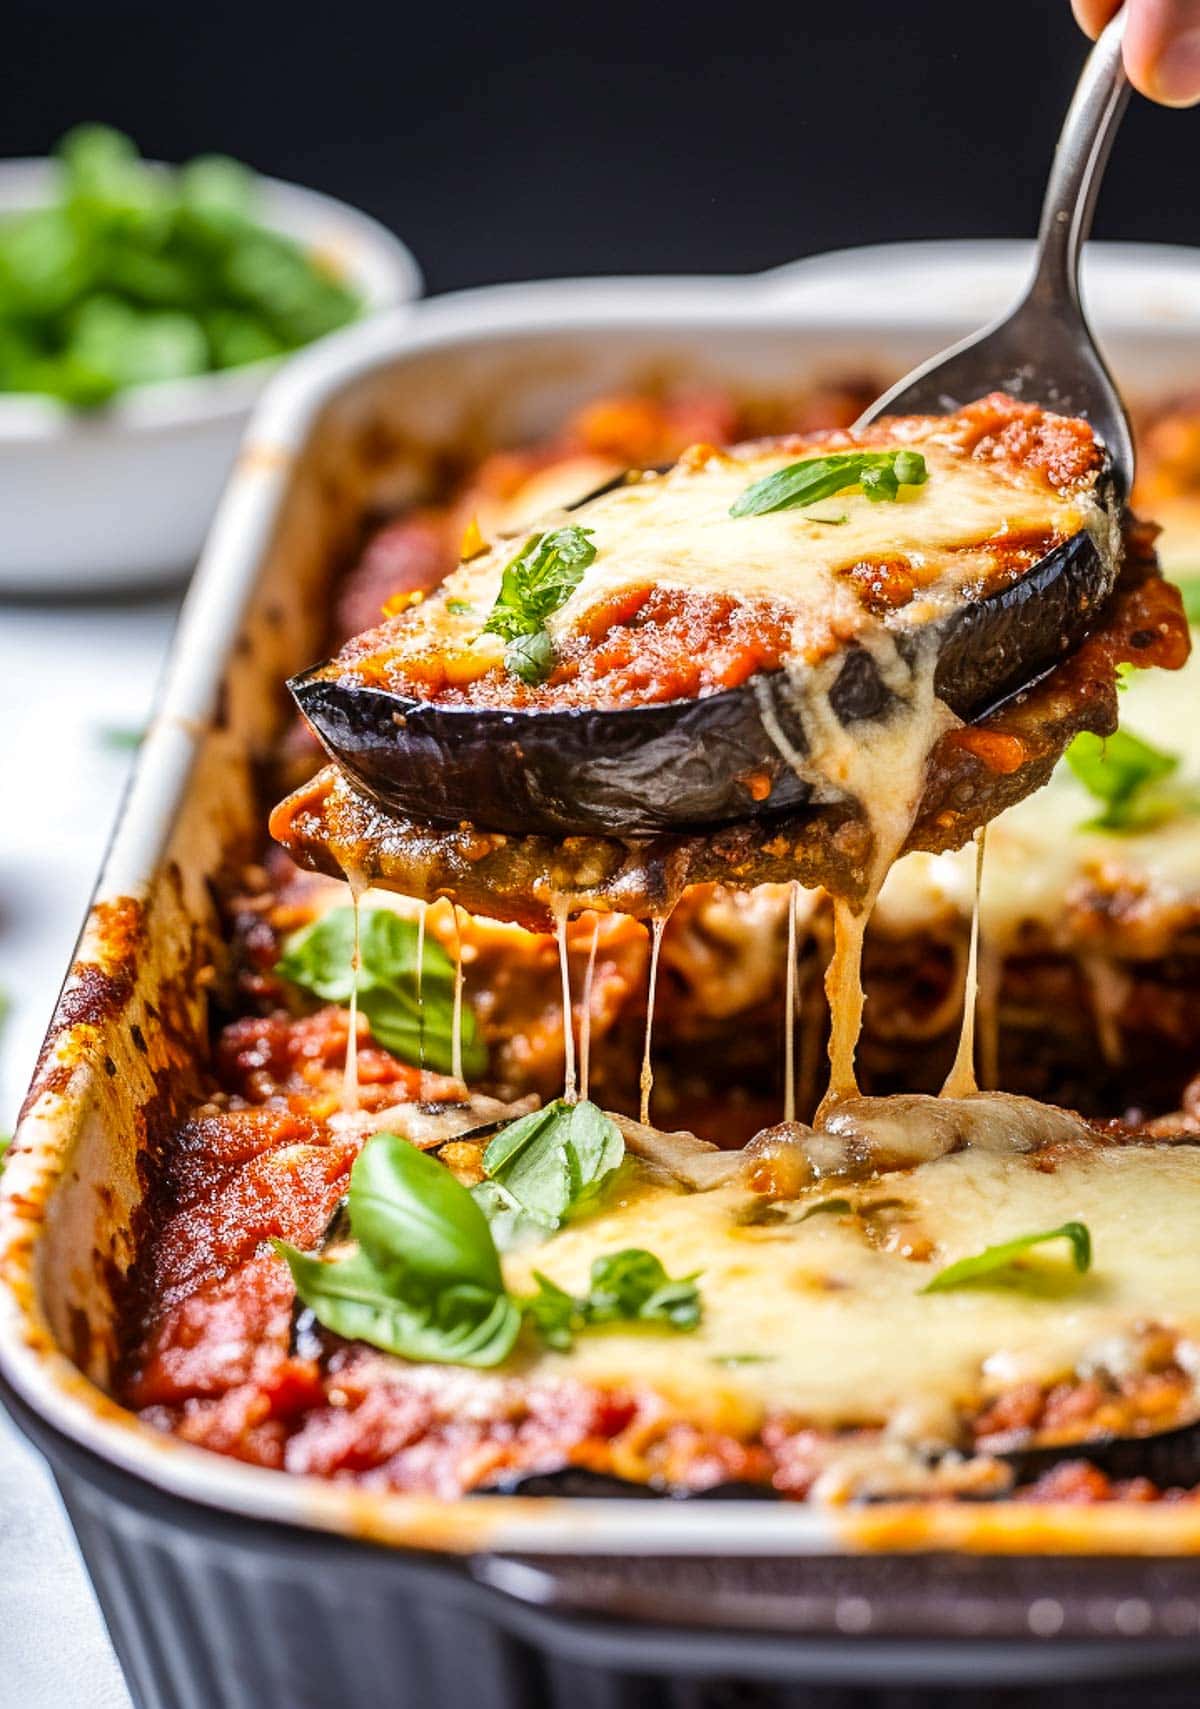 This Eggplant Parmesan recipe is made with layers of lightly breaded baked eggplant, flavorful marinara sauce, parmesan cheese and melty mozzarella. Robust and flavorful, this classic Italian dish is one your whole family will love. 